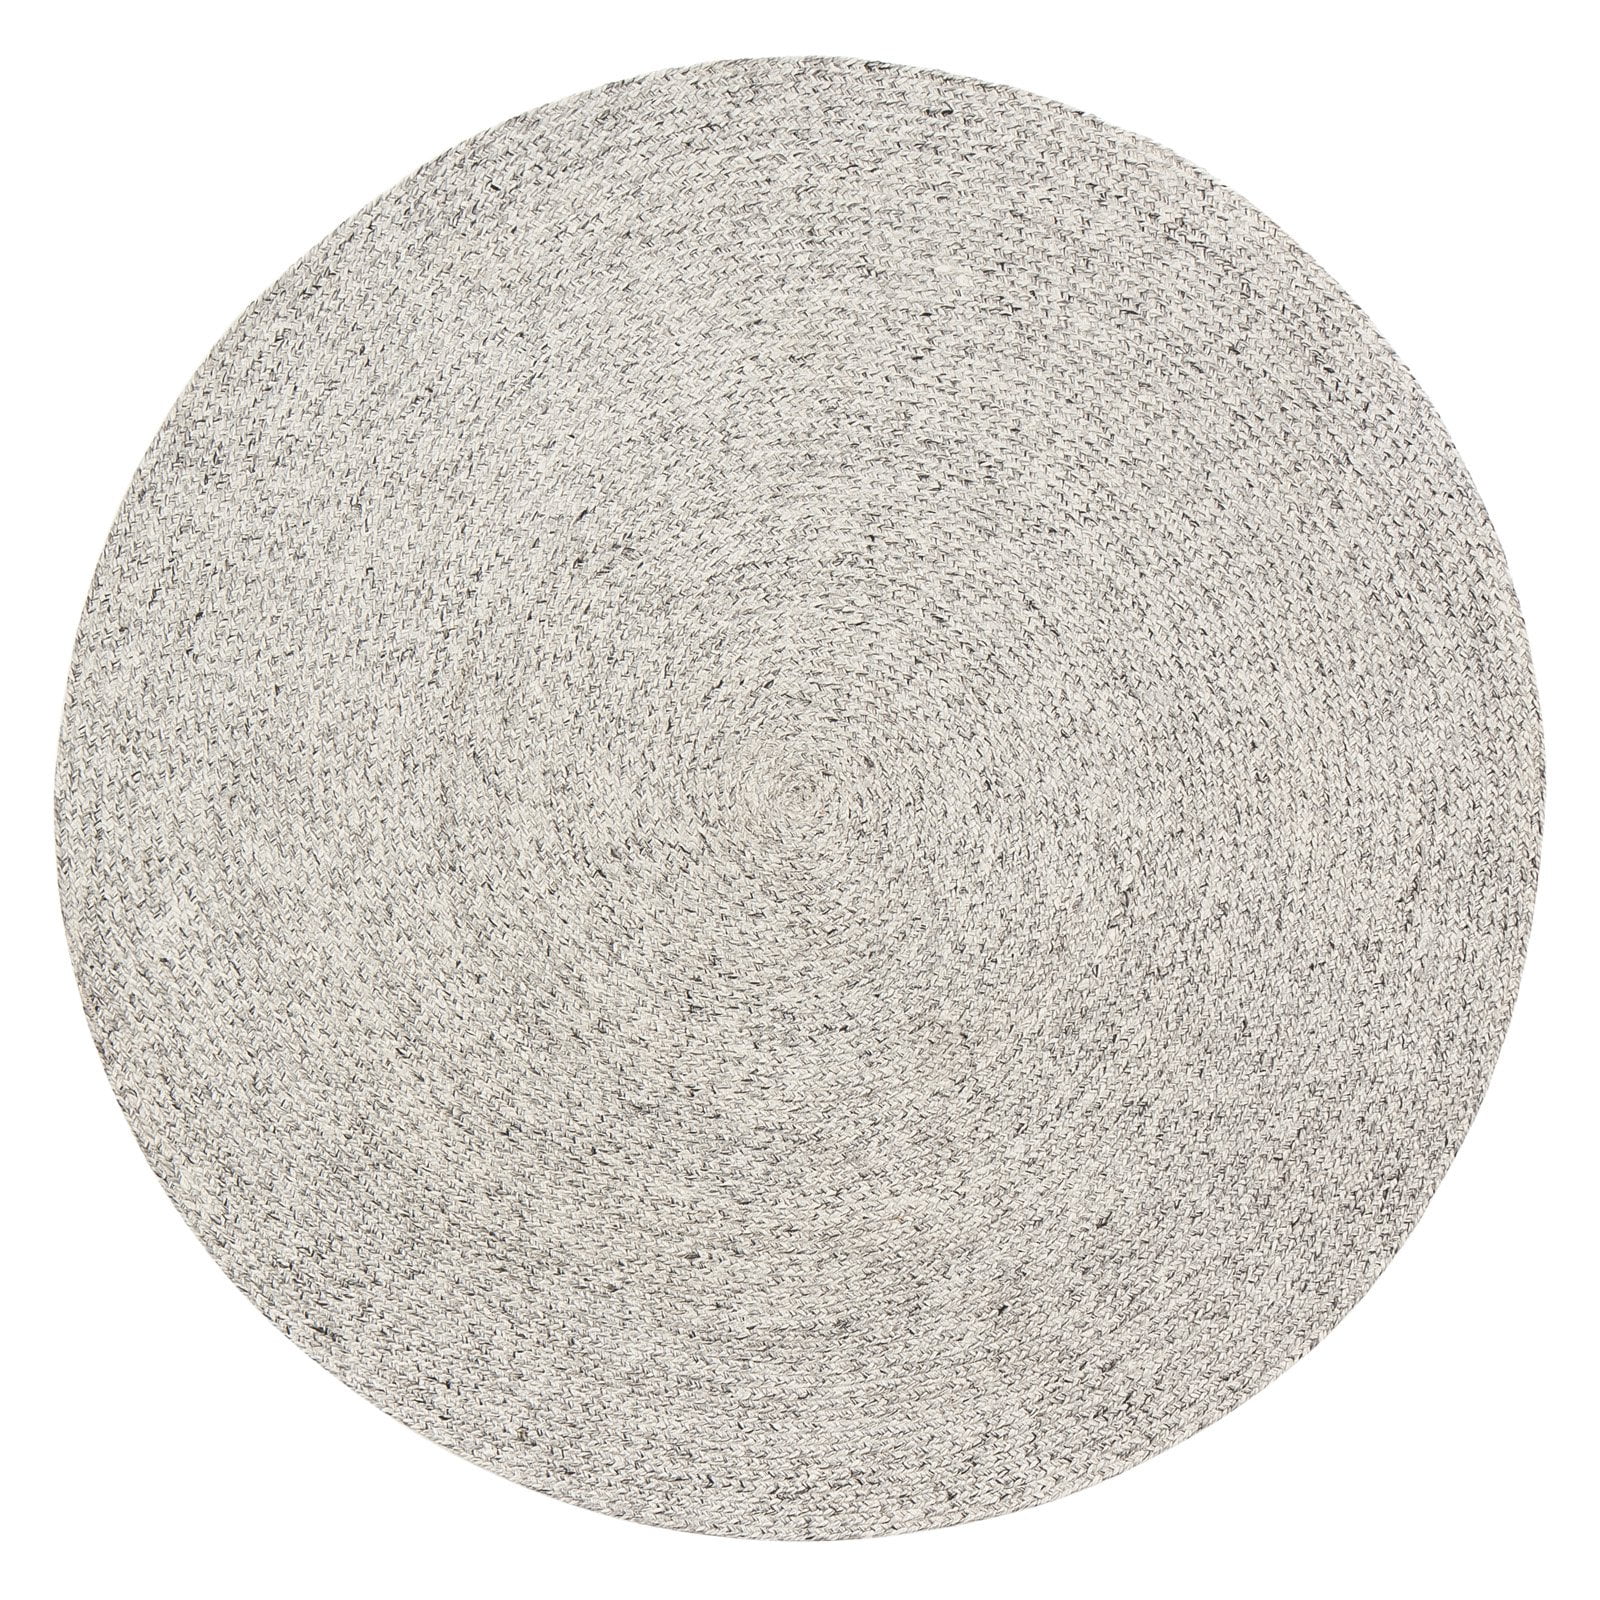 Picture of Anji Mountain AMB0622-080R 8 x 8 ft. Round Cosmos Area Rug - Gray, Ivory